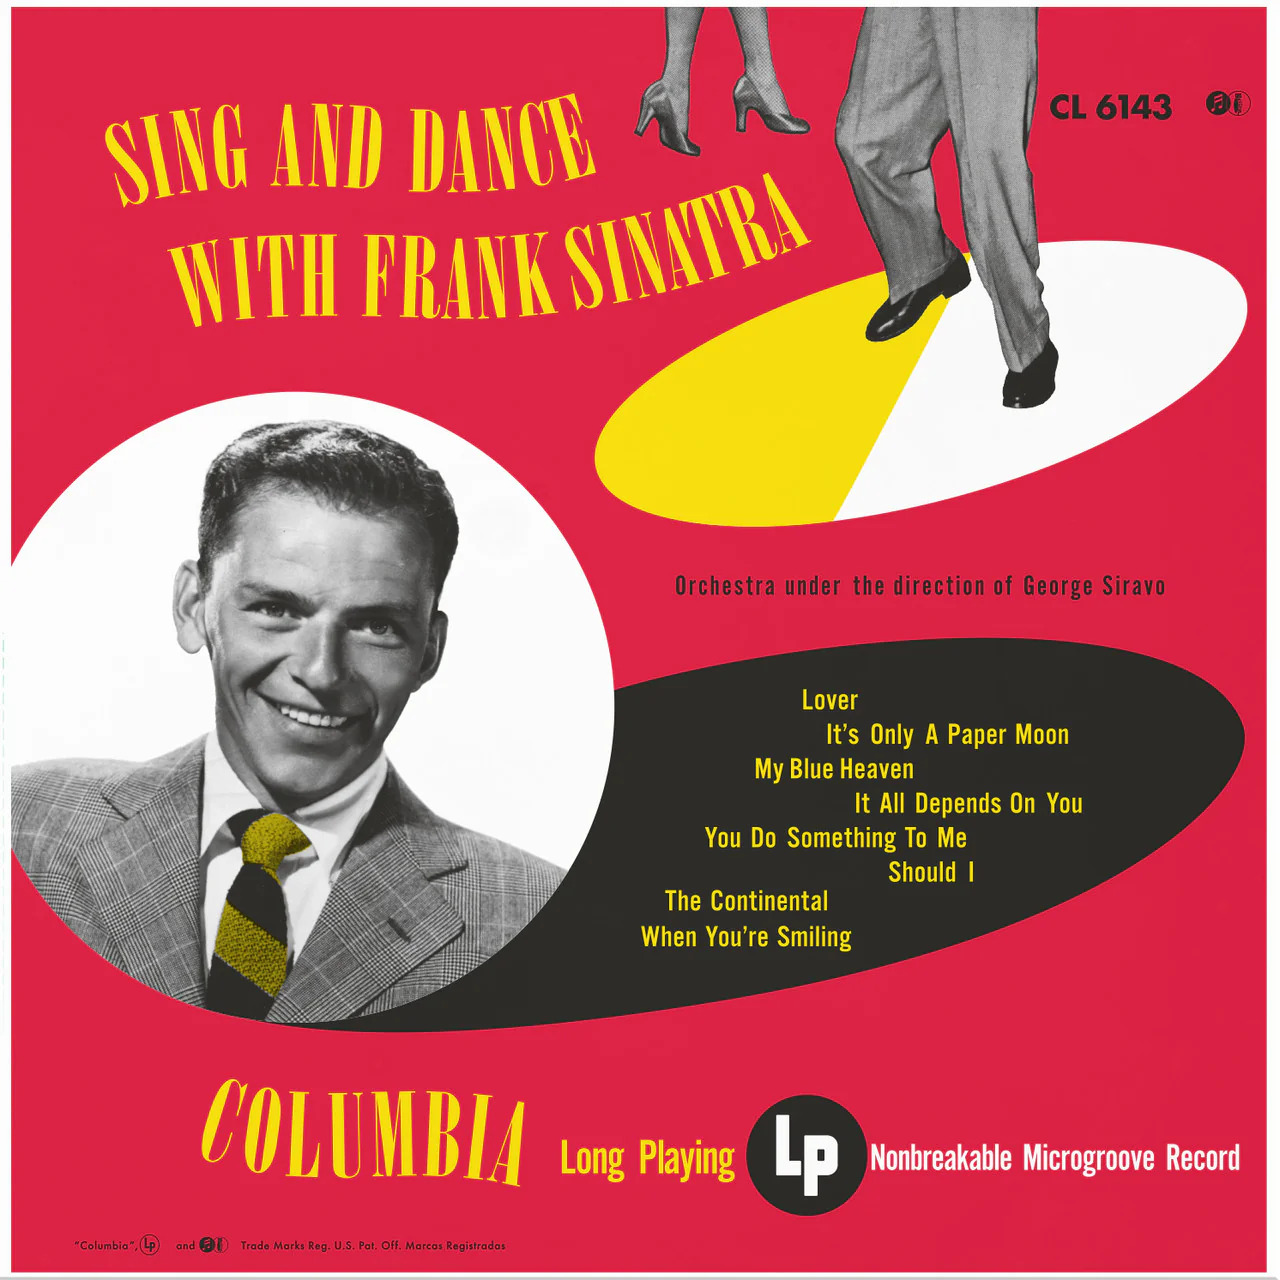 Frank Sinatra - Sing And Dance With Frank Sinatra Impex NEW Vinyl